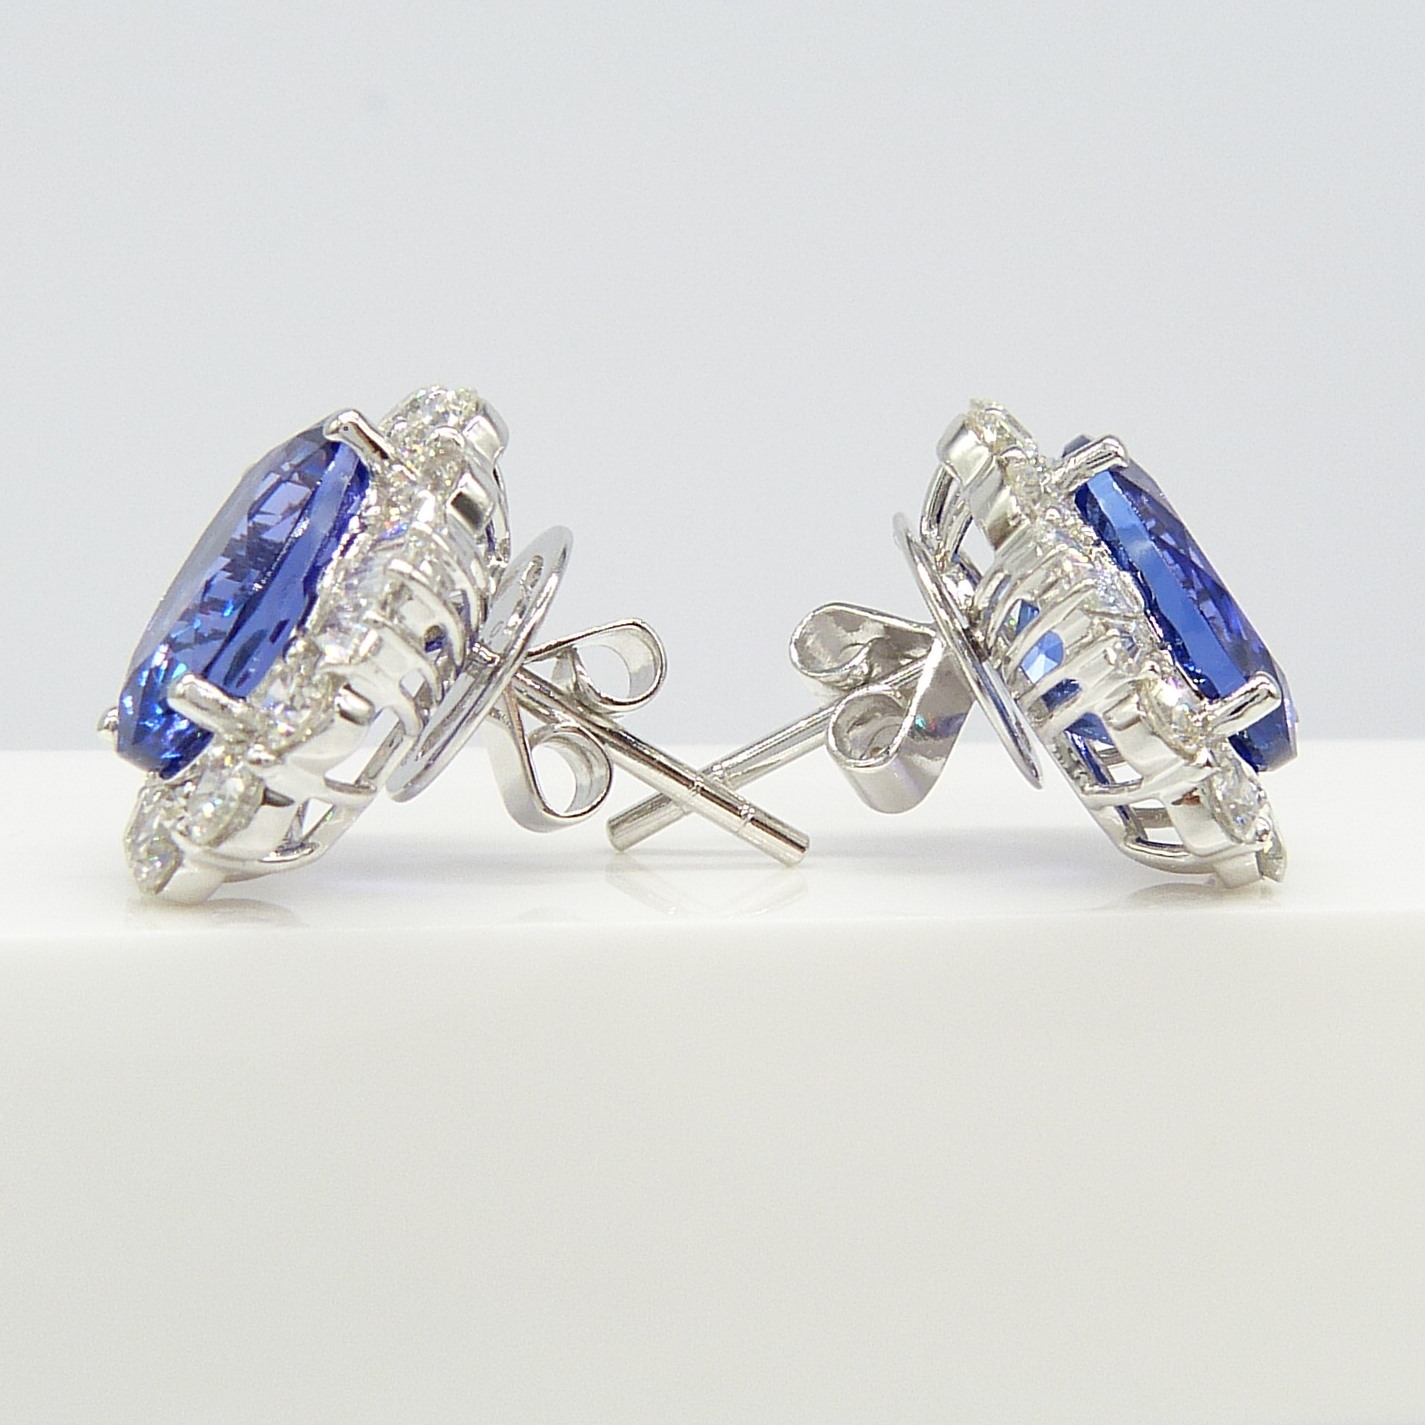 A large pair of loupe-clean tanzanite and diamond cluster earrings in 18ct white gold, certificated - Image 9 of 9